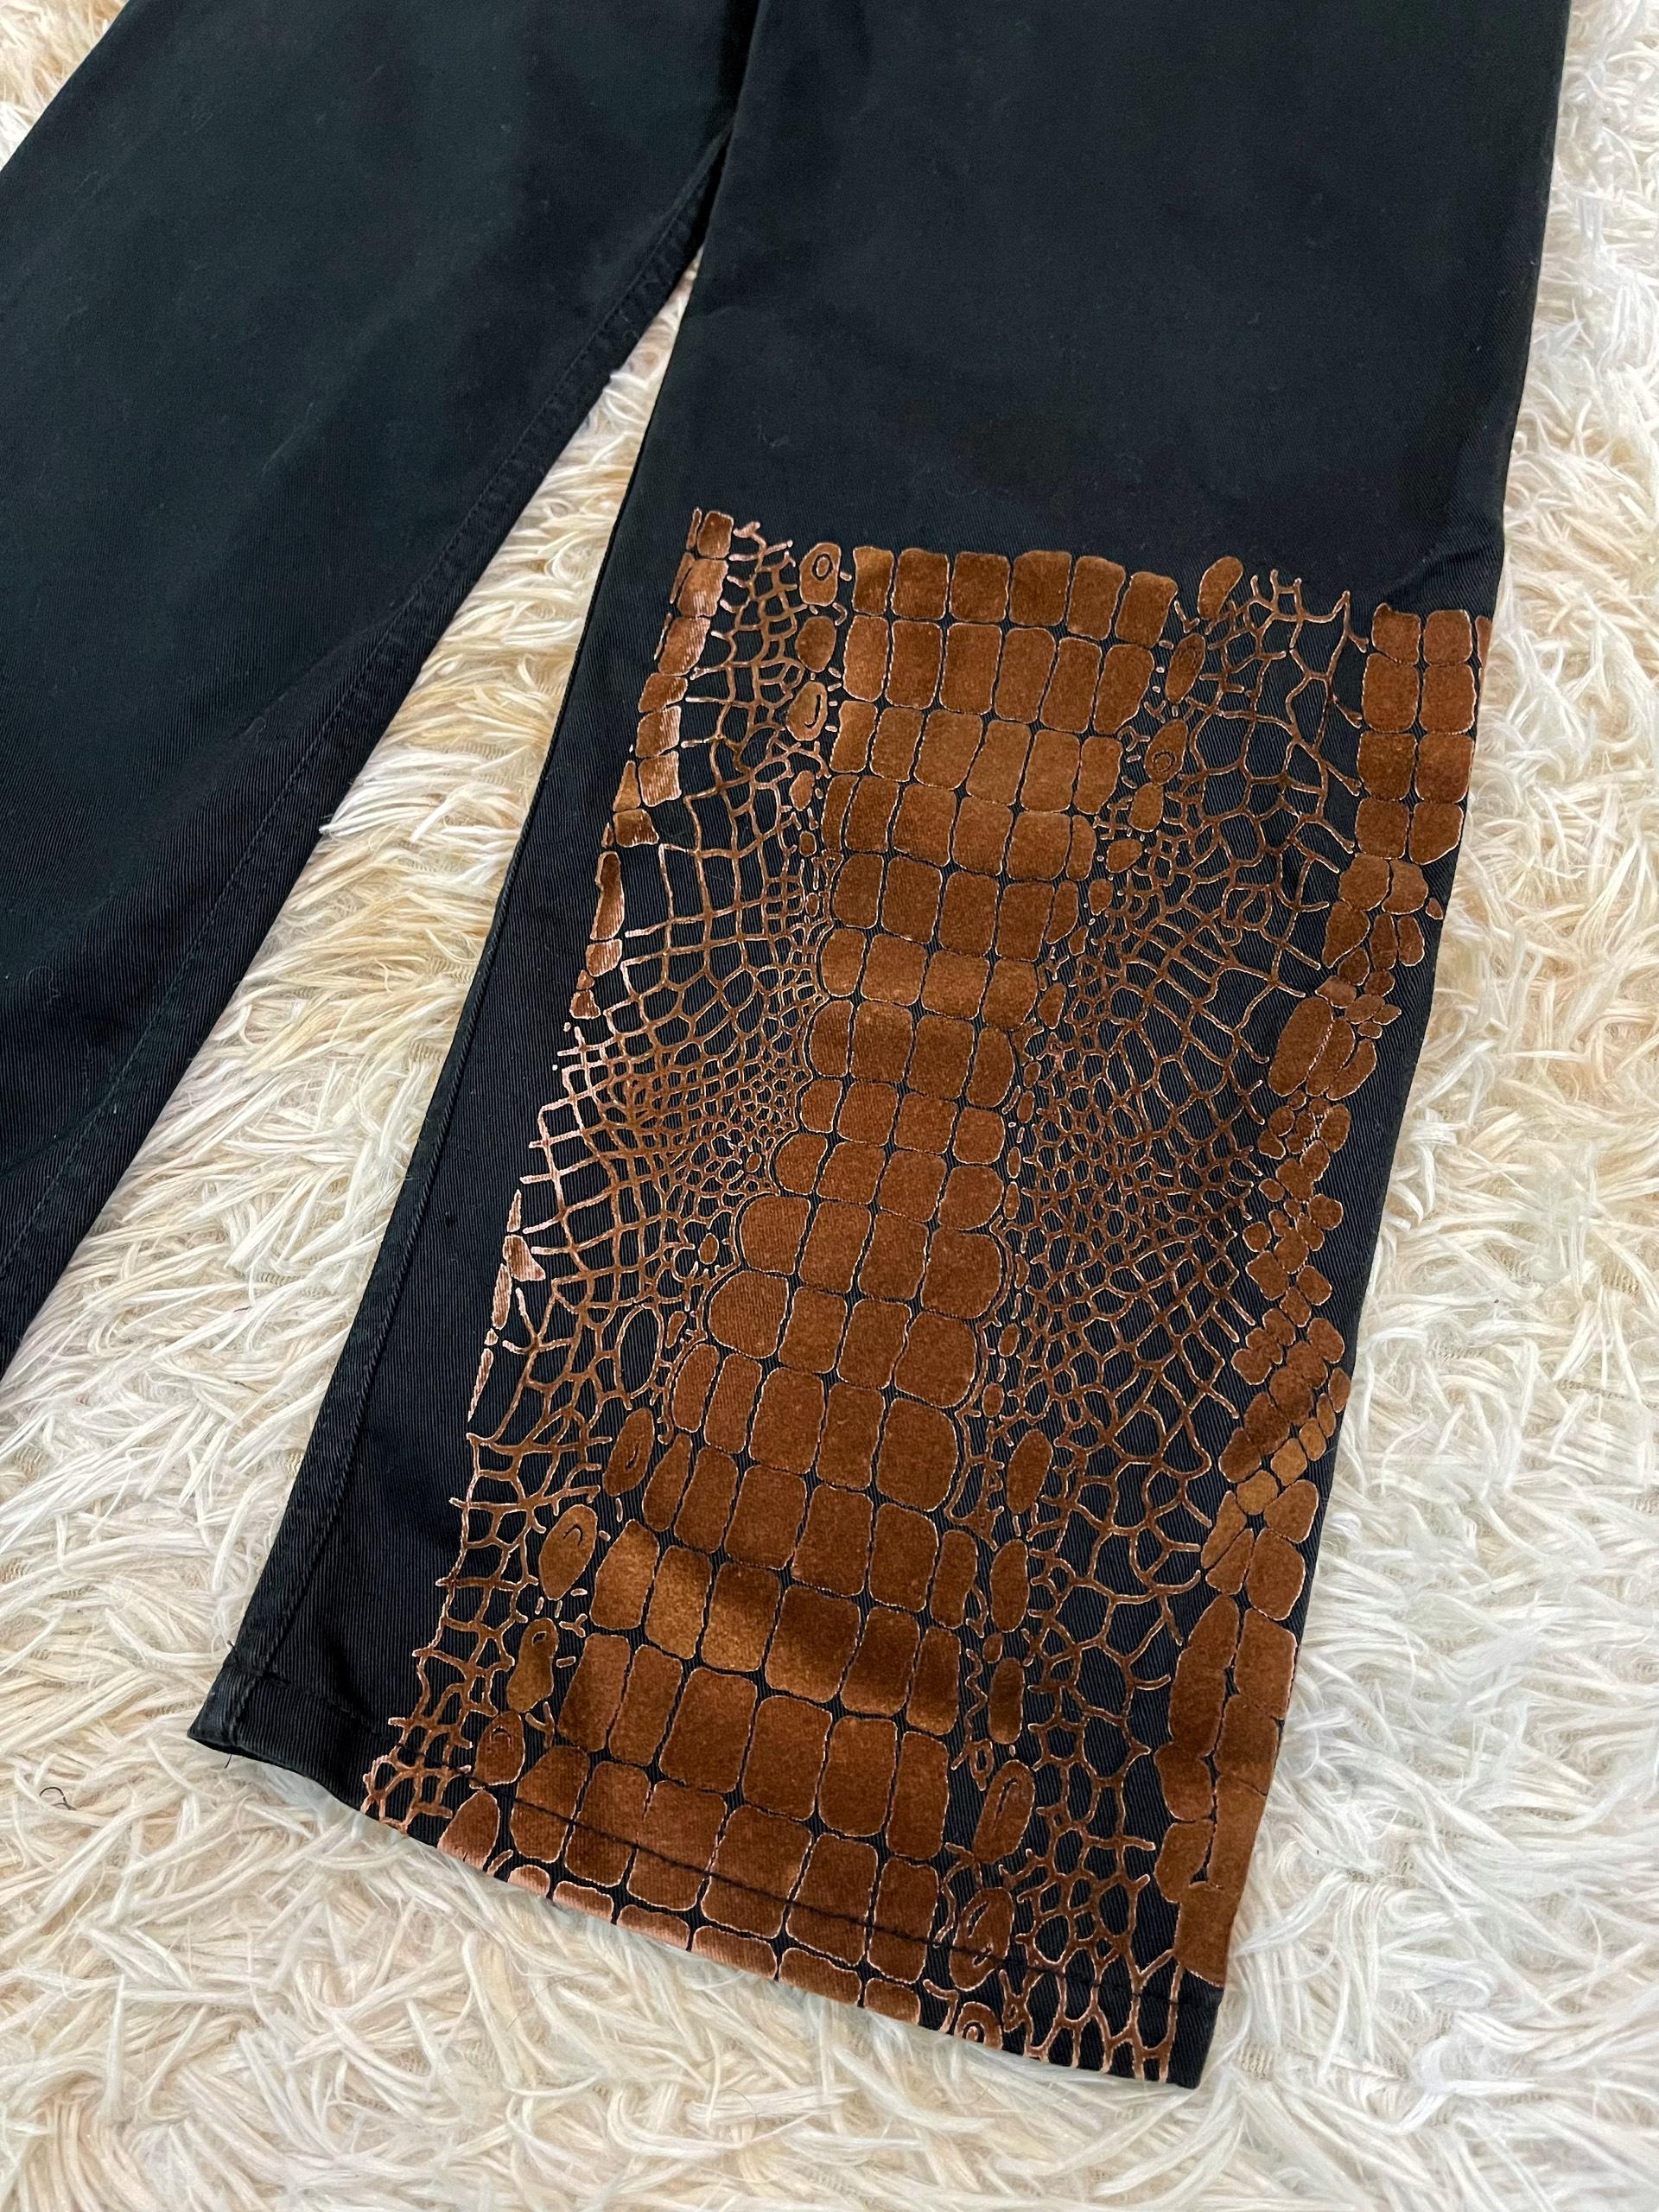 Jean Paul Gaultier A/W1999 Snakeskin Patched Denim For Sale 1